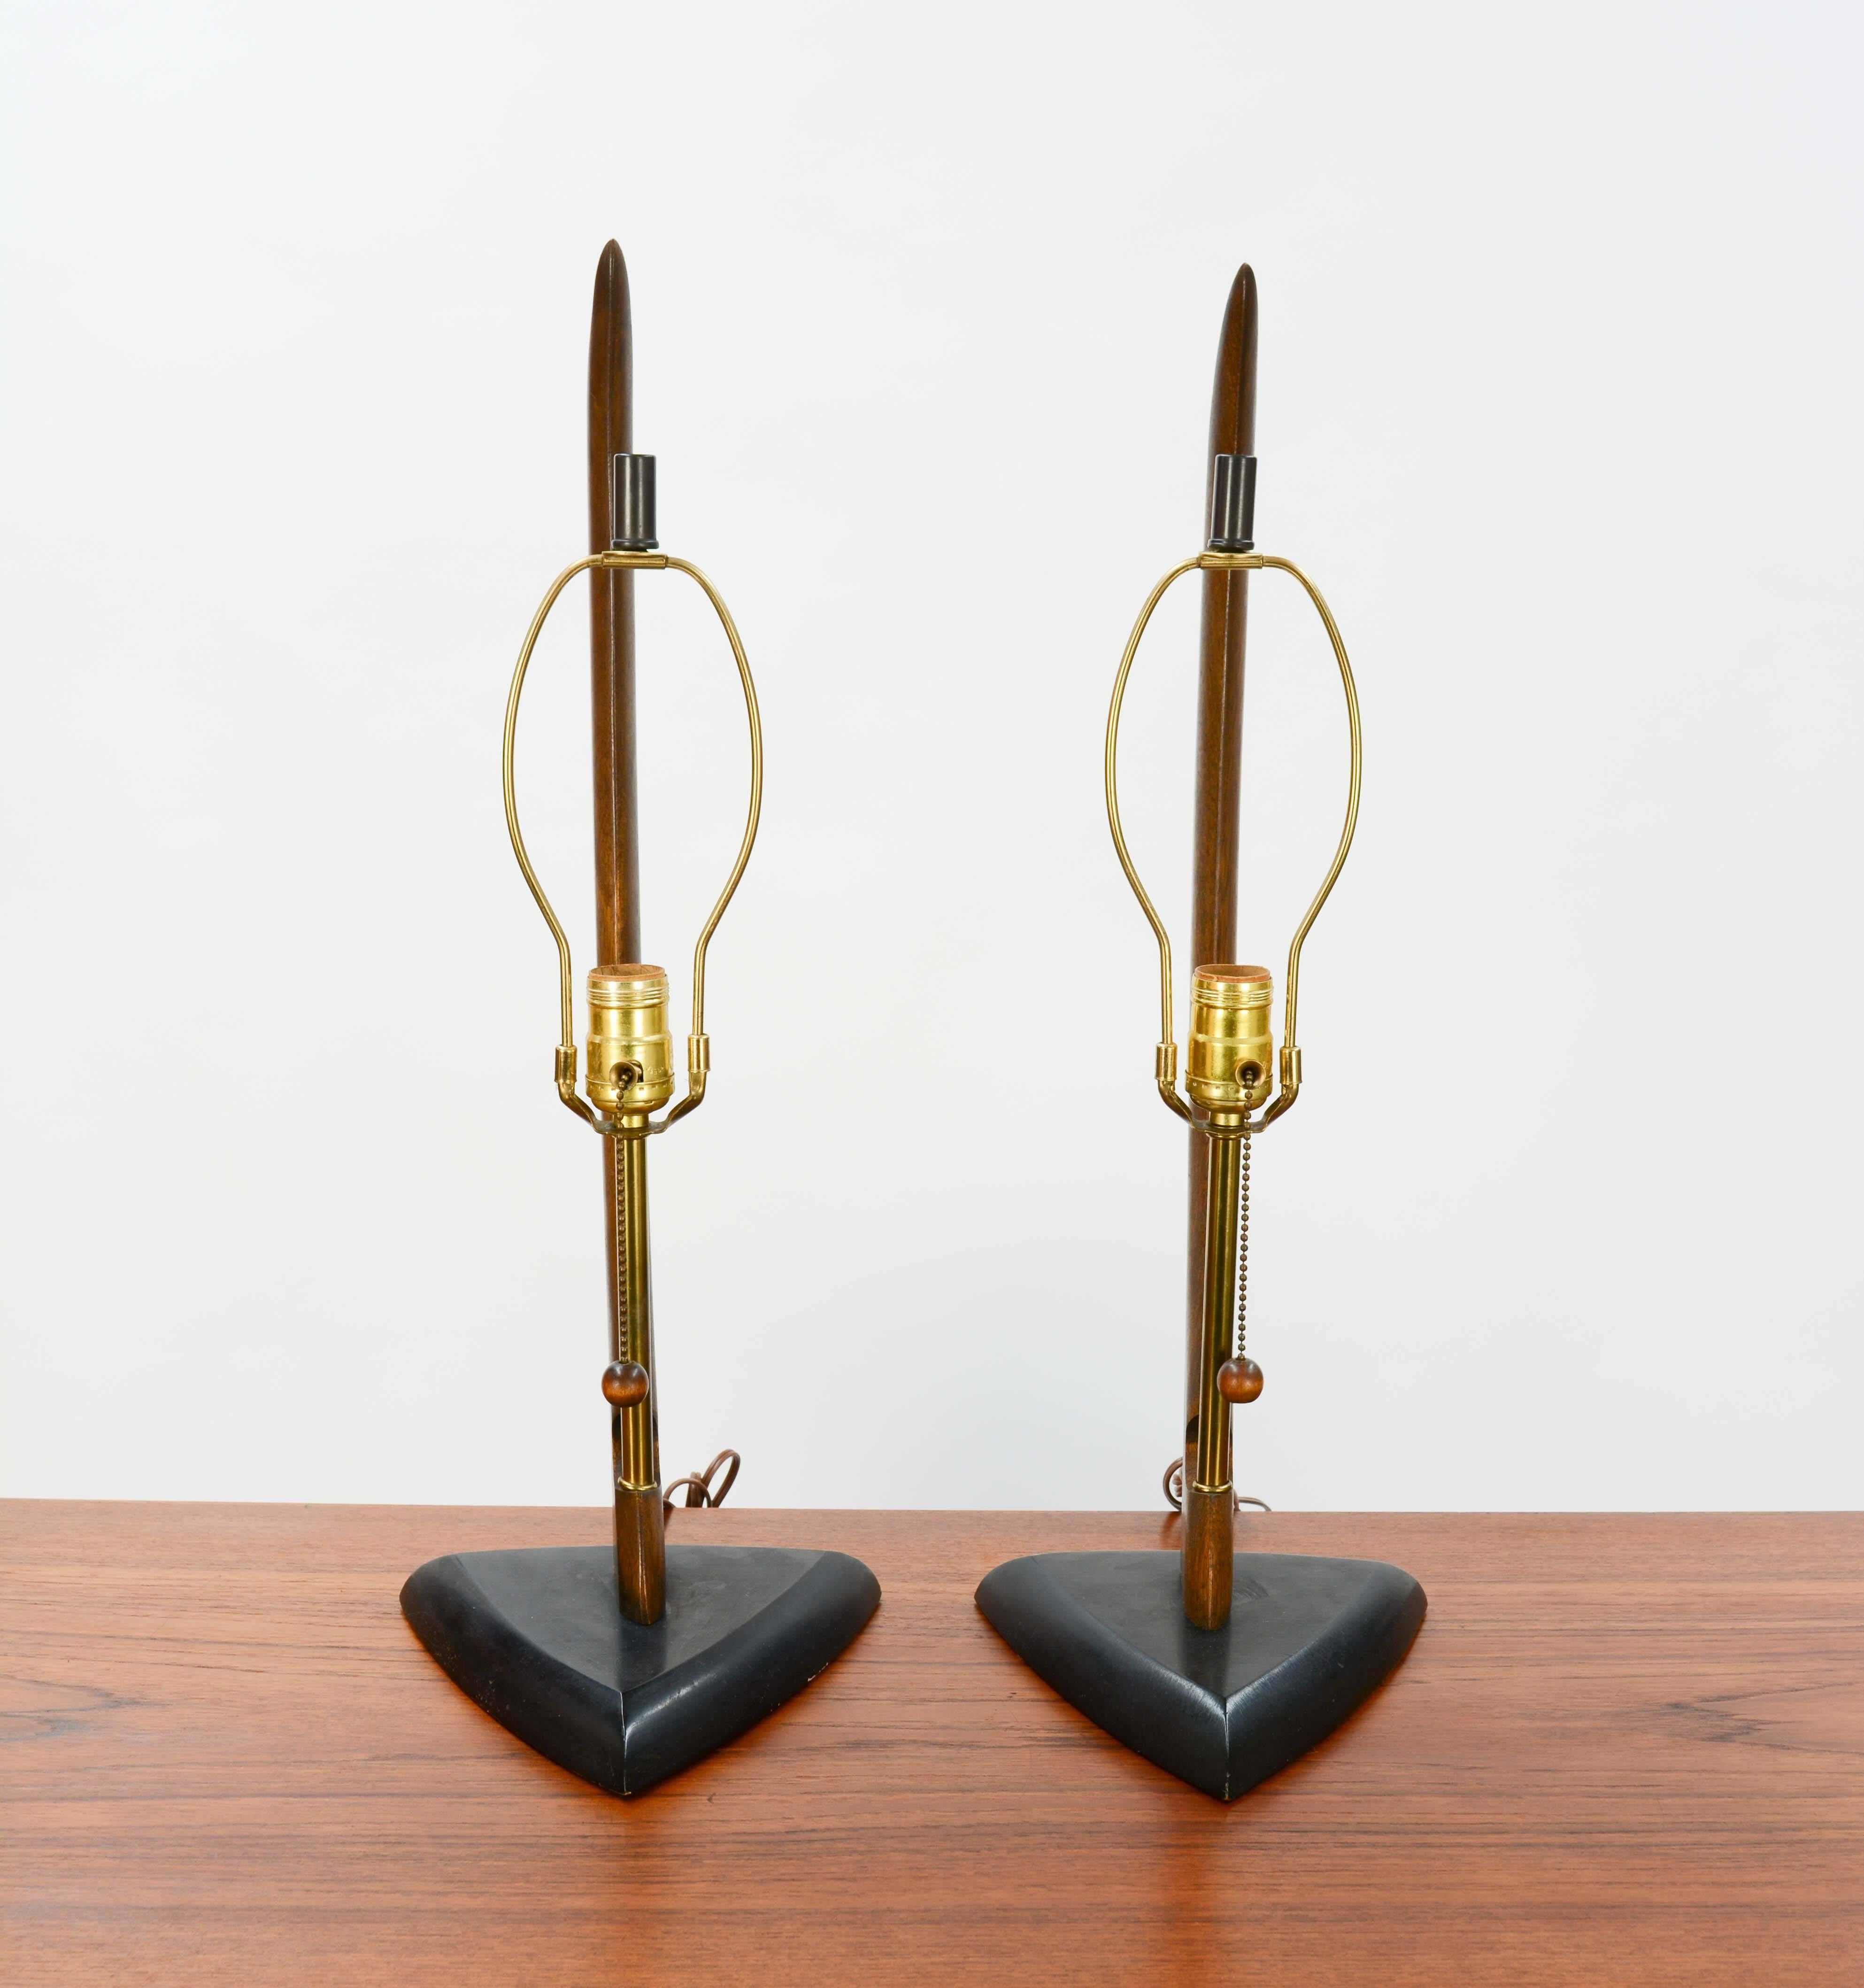 Pair of Modeline Lamps of California with Sweeping Body In Good Condition For Sale In Portland, OR